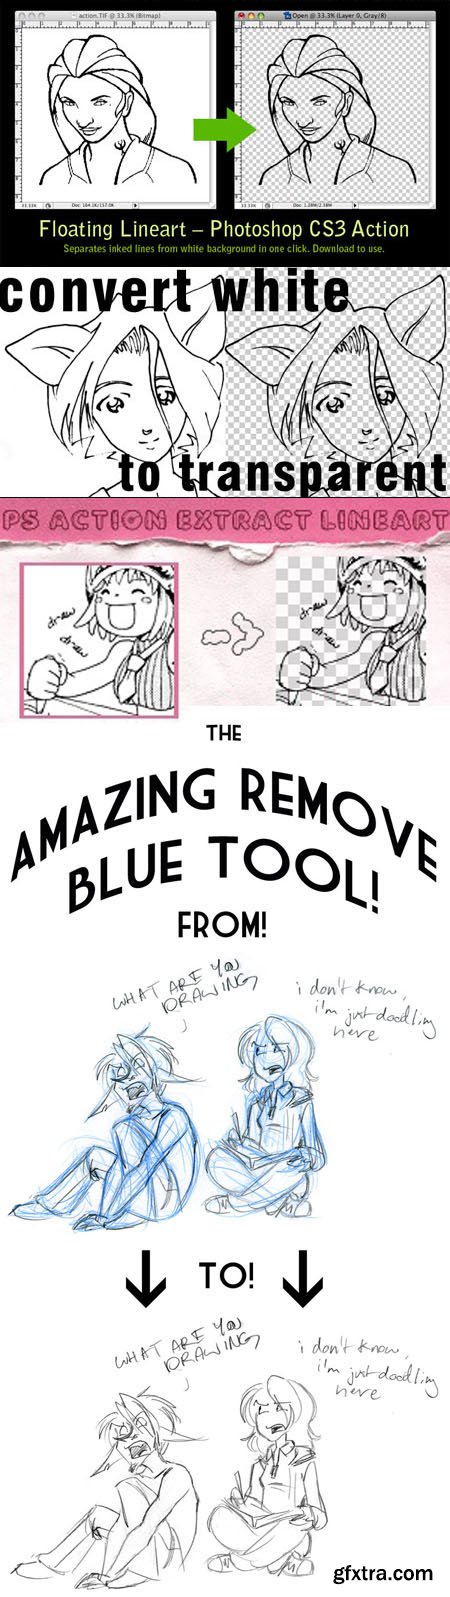 Floating Lineart & Remove Blue Pencil Actions for Photoshop